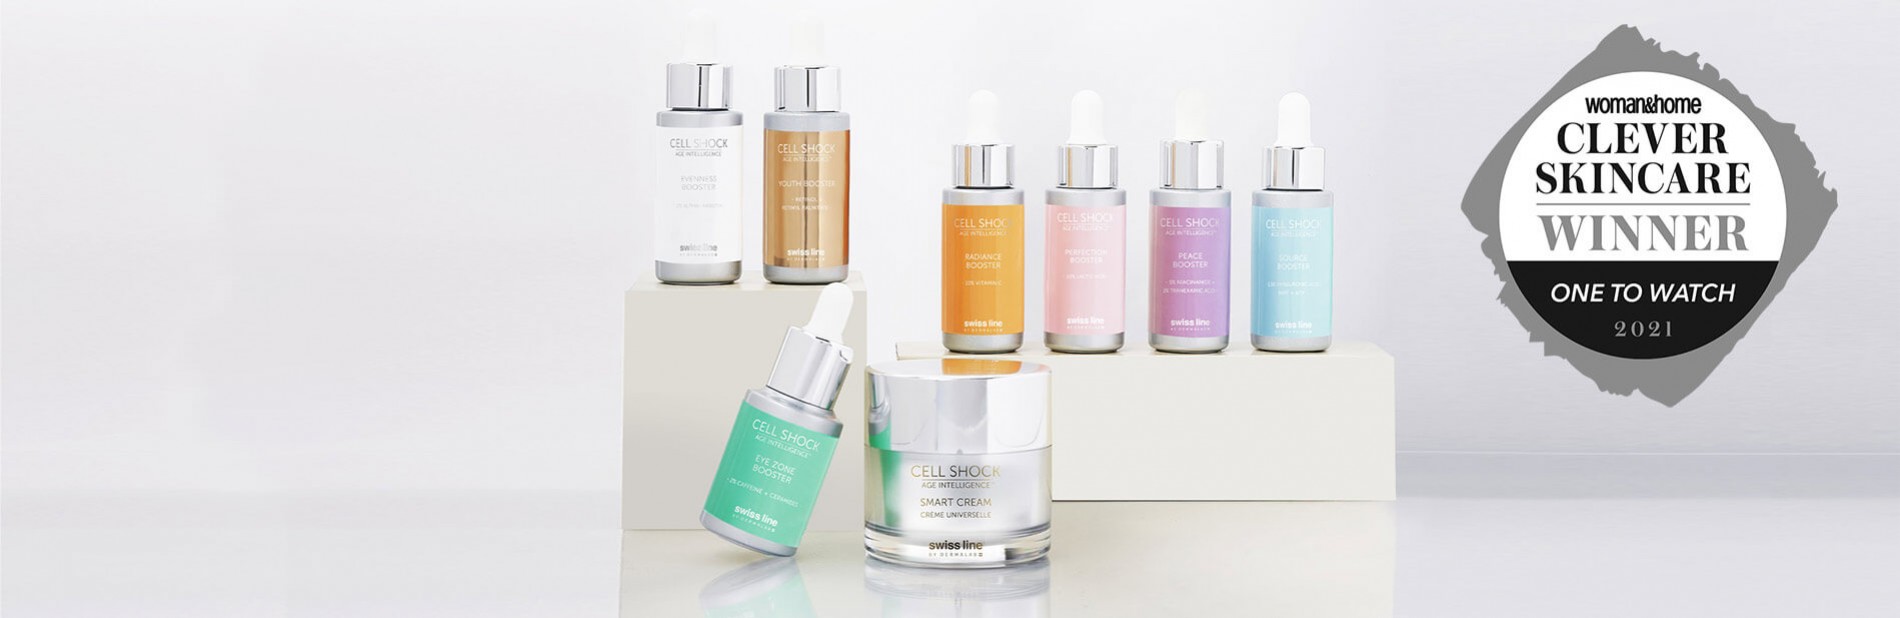 LAURÉAT DU WOMAN&HOME CLEVER SKINCARE AWARDS, CATÉGORIE ONE TO WATCH